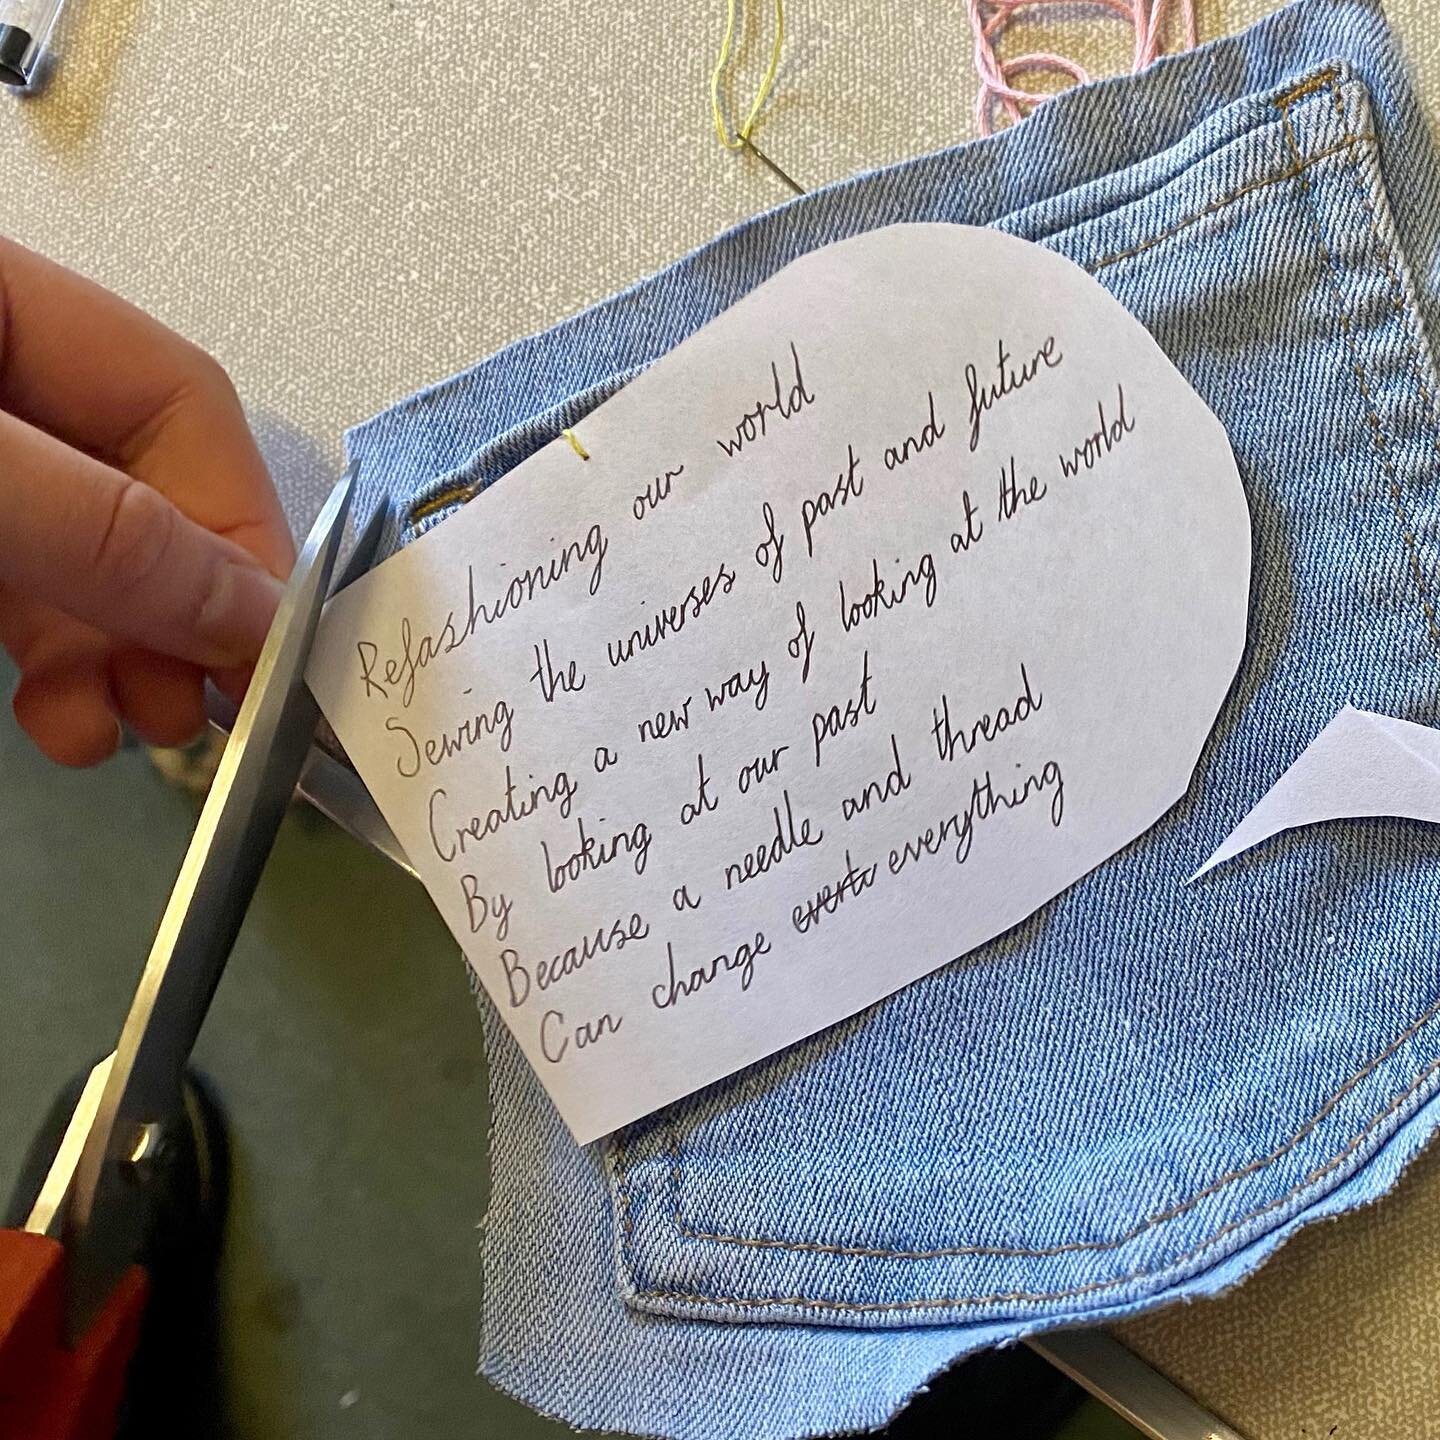 Looking forward to taking part in the @rethinkfashiondorchester panel discussion and Fashion Show at Dorset Museum tomorrow! Will be great to talk about the Fashioning Our World project at the event @dorsetmuseum 

Photo shows some inspiring words fr